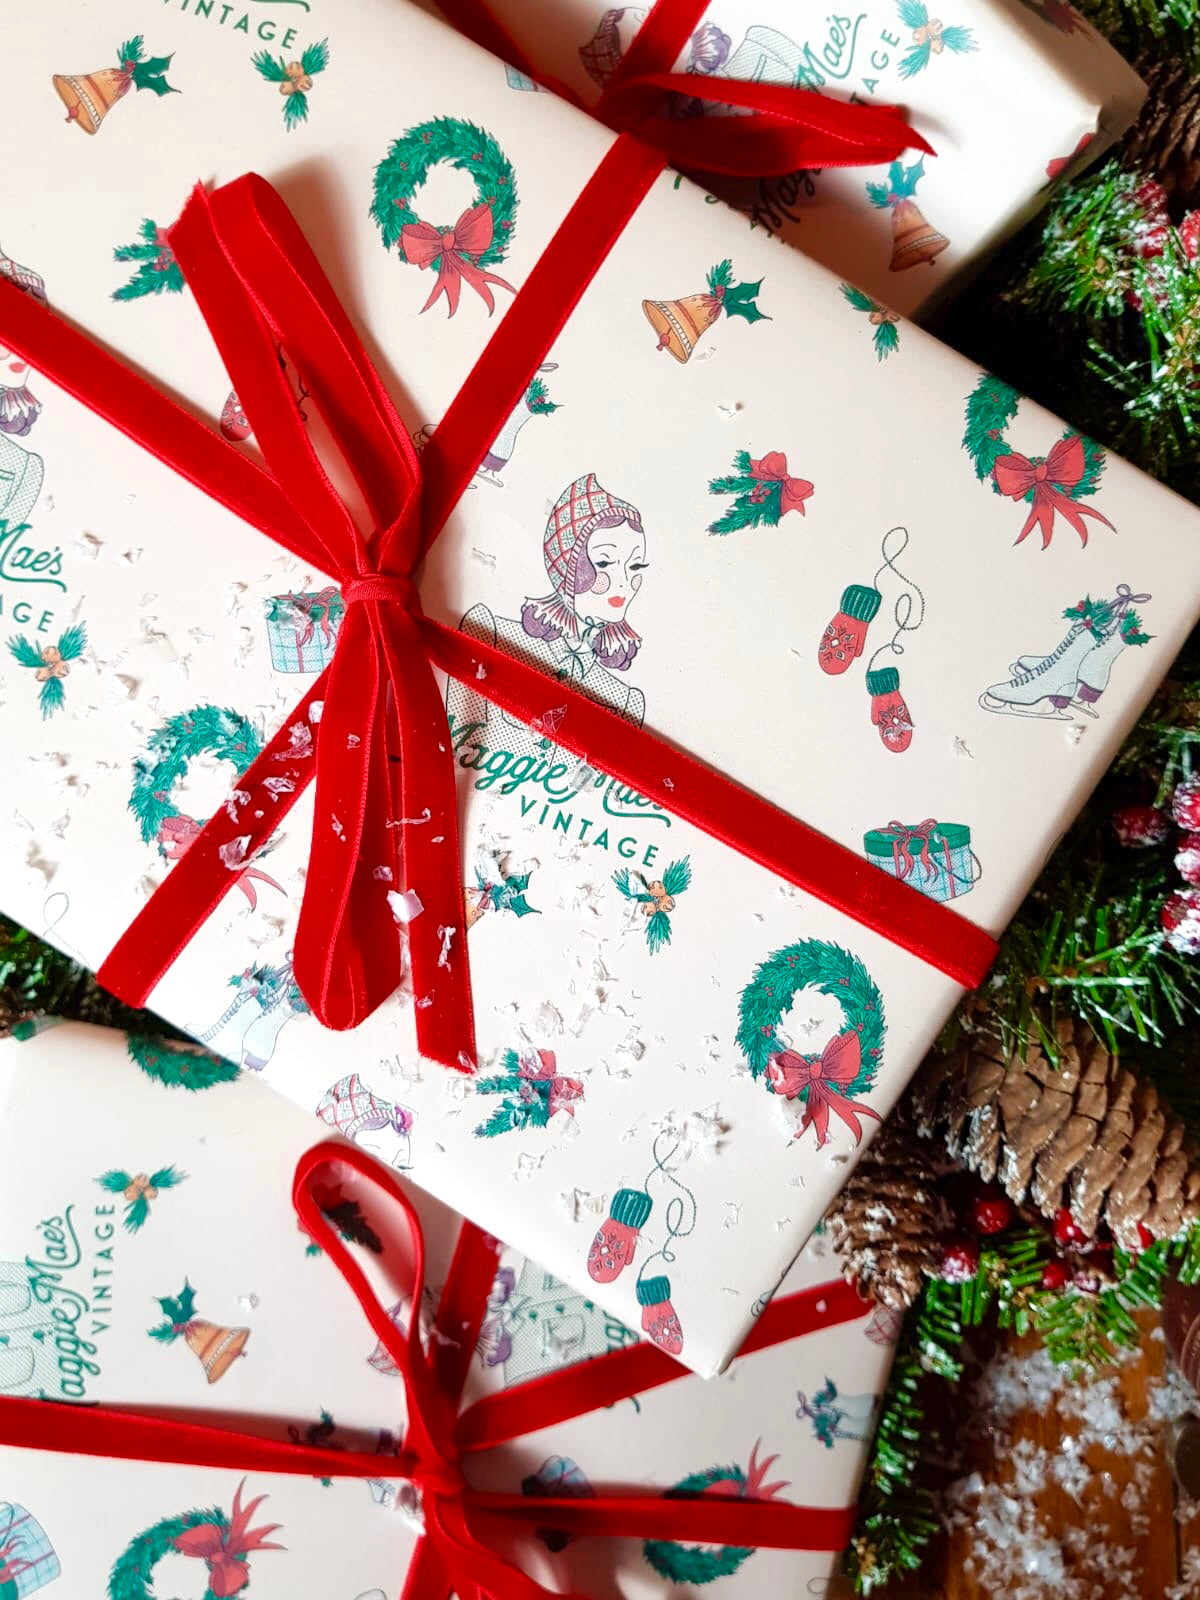 Gift Wrapping Service with Festive Wrapping Paper & Ribbon / Twine - Exclusively Designed By Shropshire Illustrator Hannah Chumbley